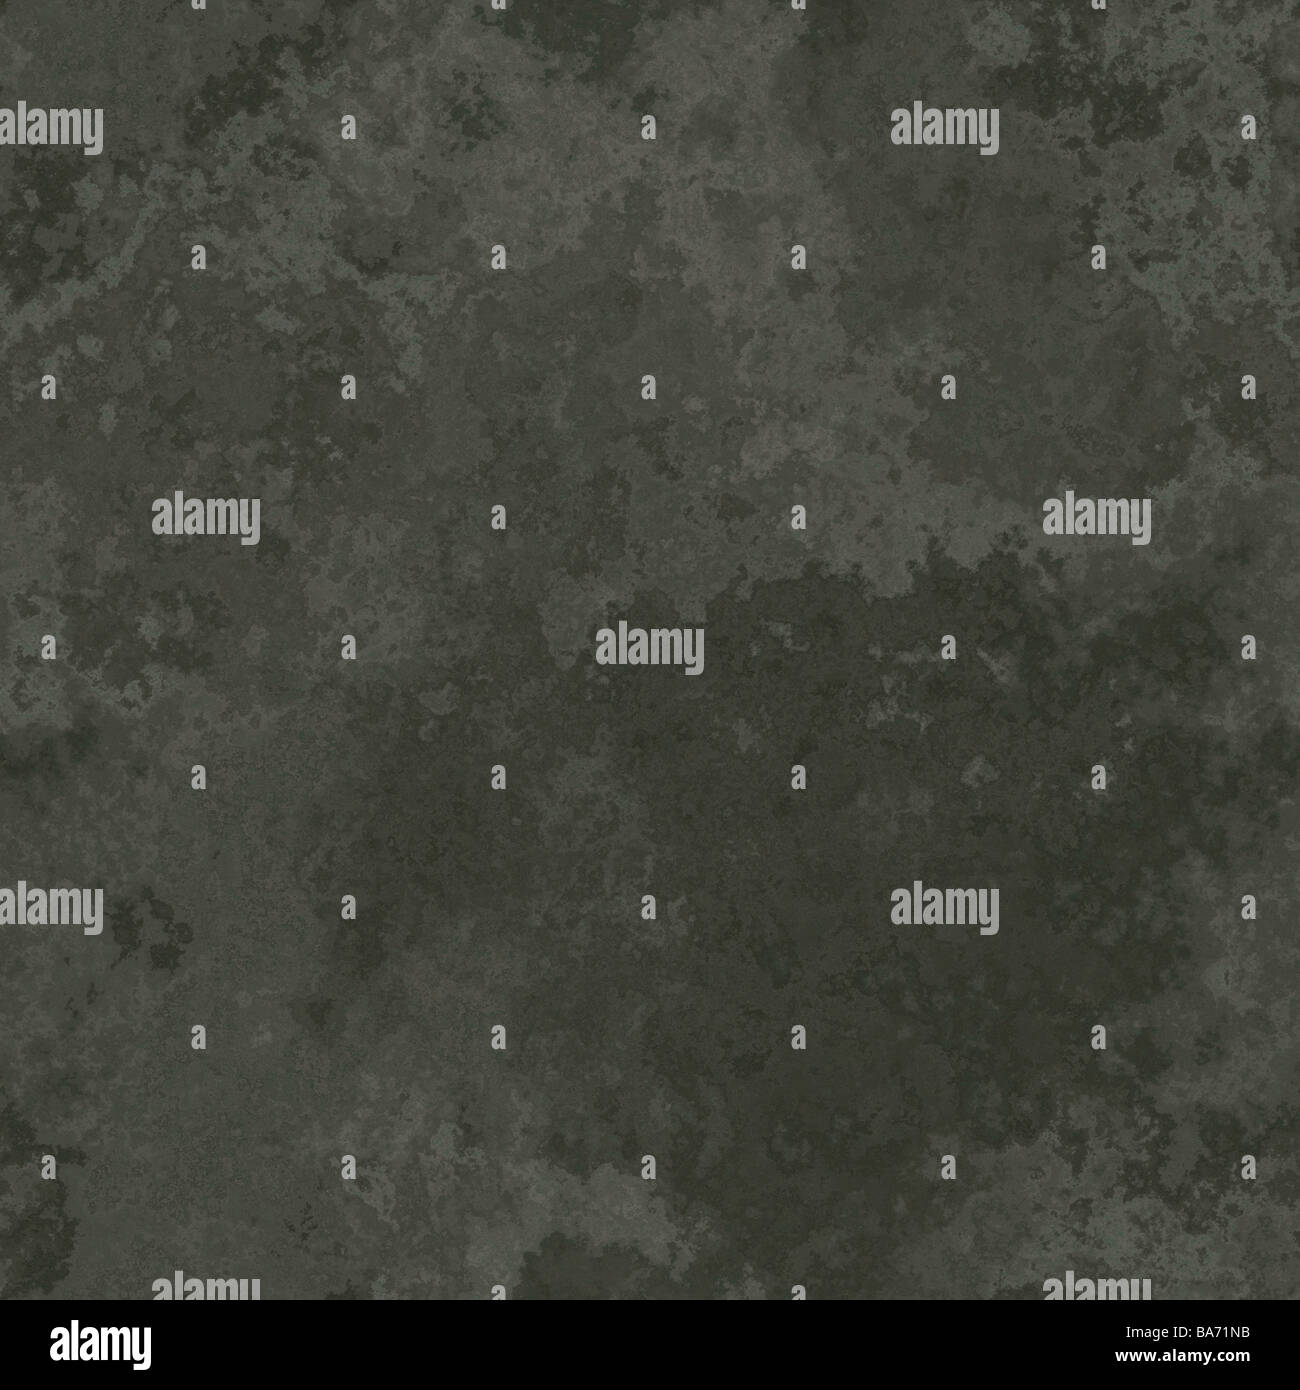 Marble material texture seamless background tile pattern Stock Photo ...